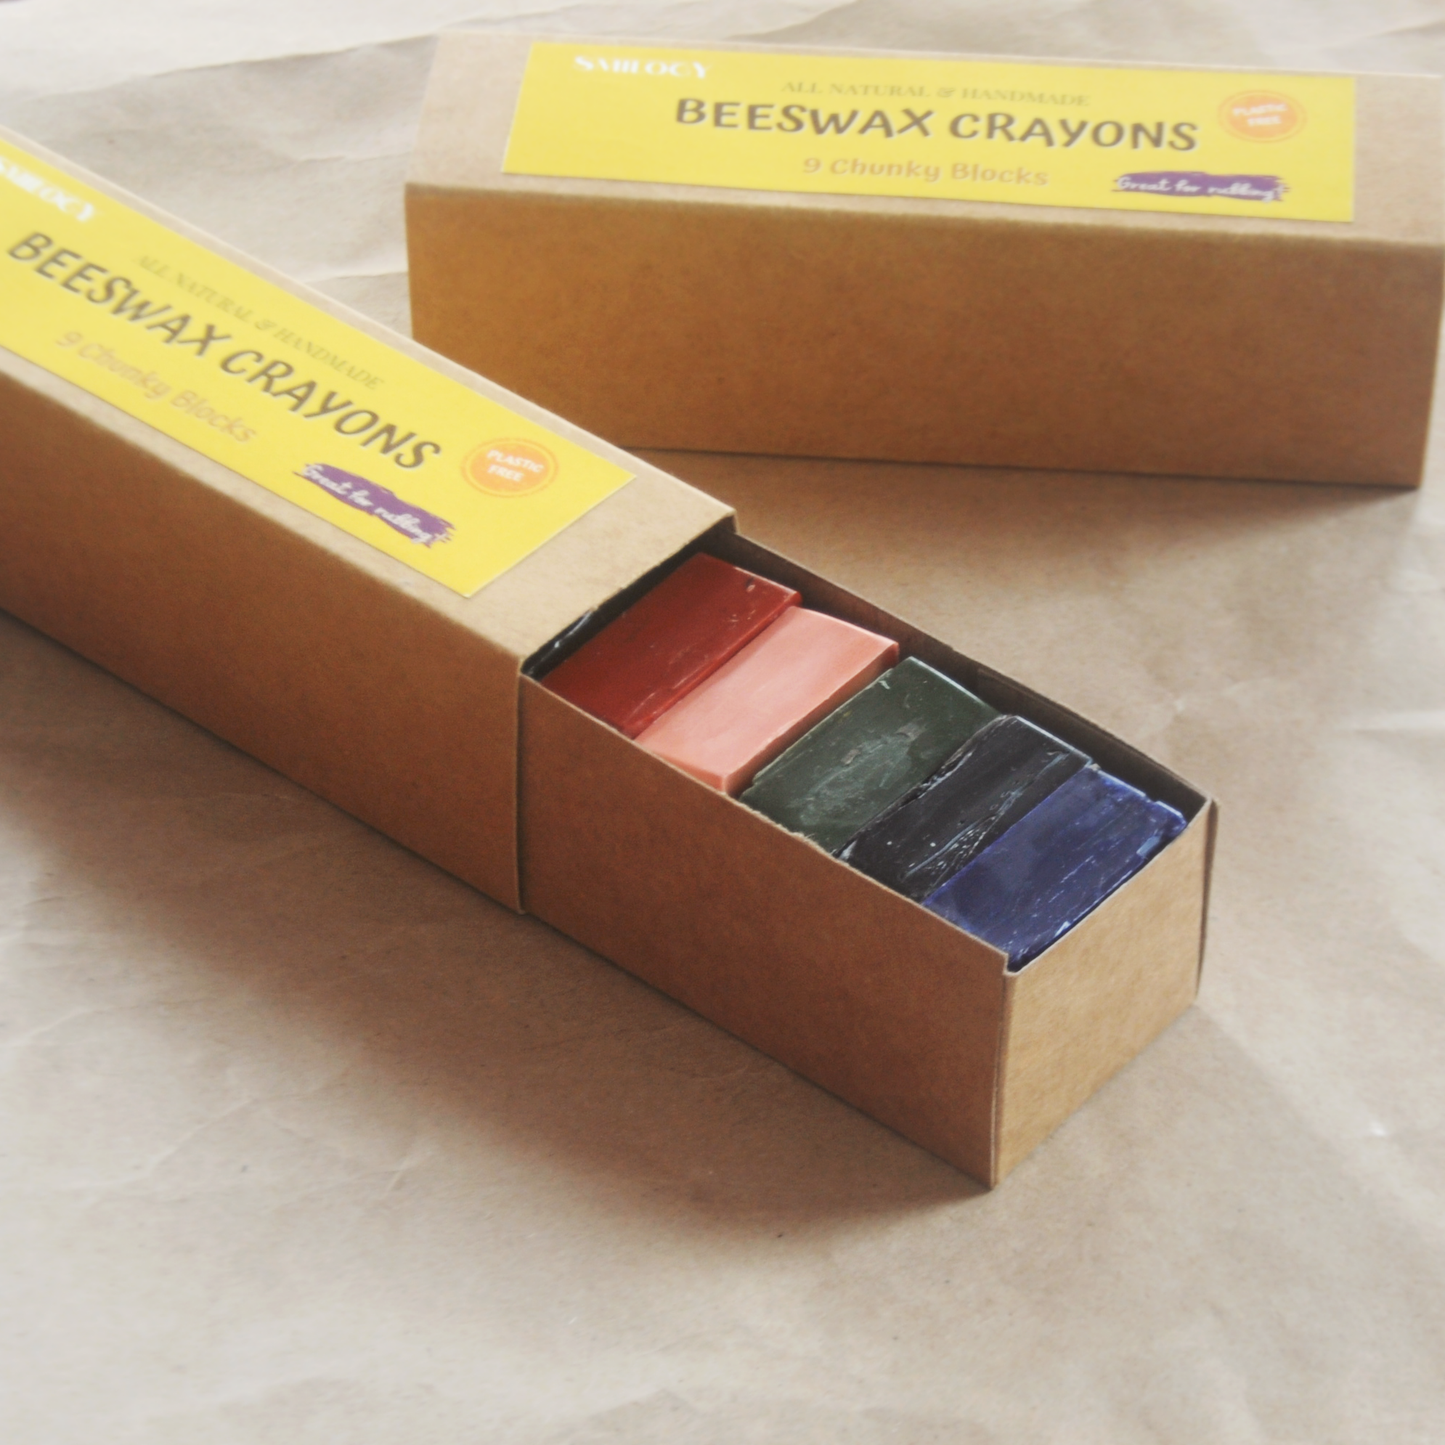 organic beeswax block crayons inside its box with box a little open